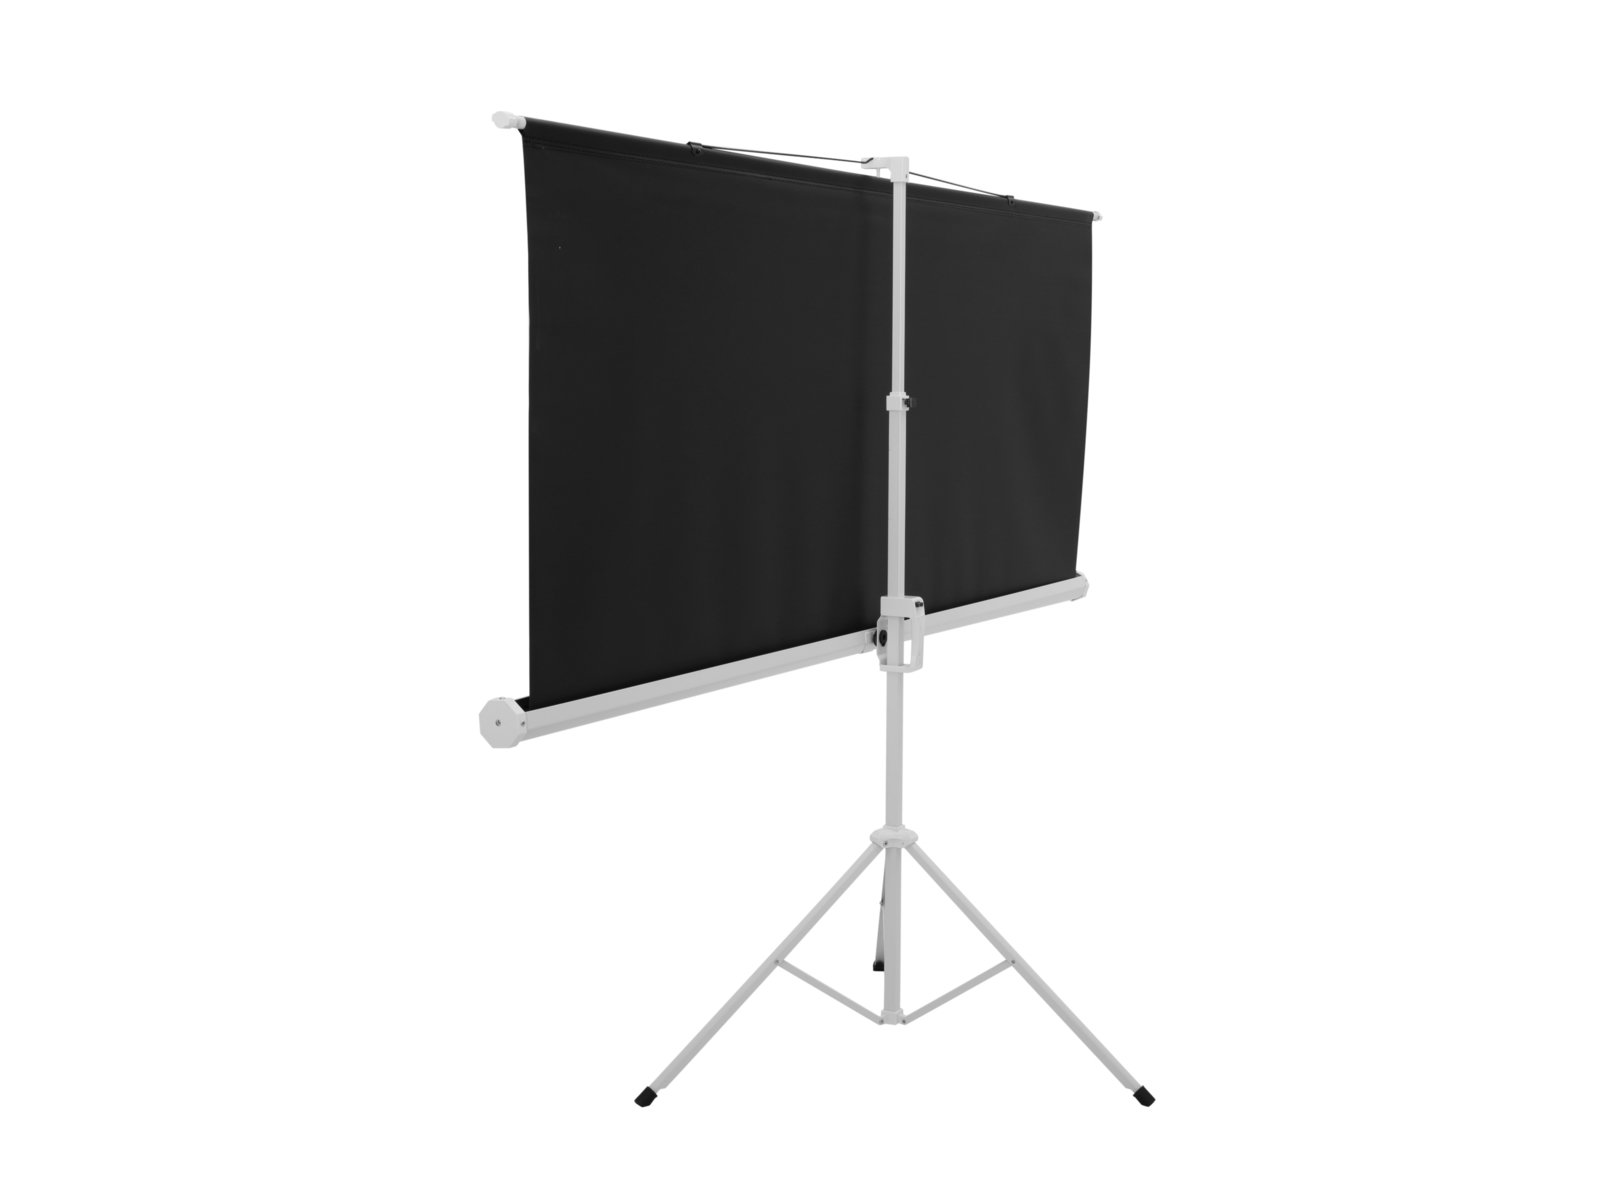 EUROLITE Projection Screen 4:3, 2×1.5m with stand